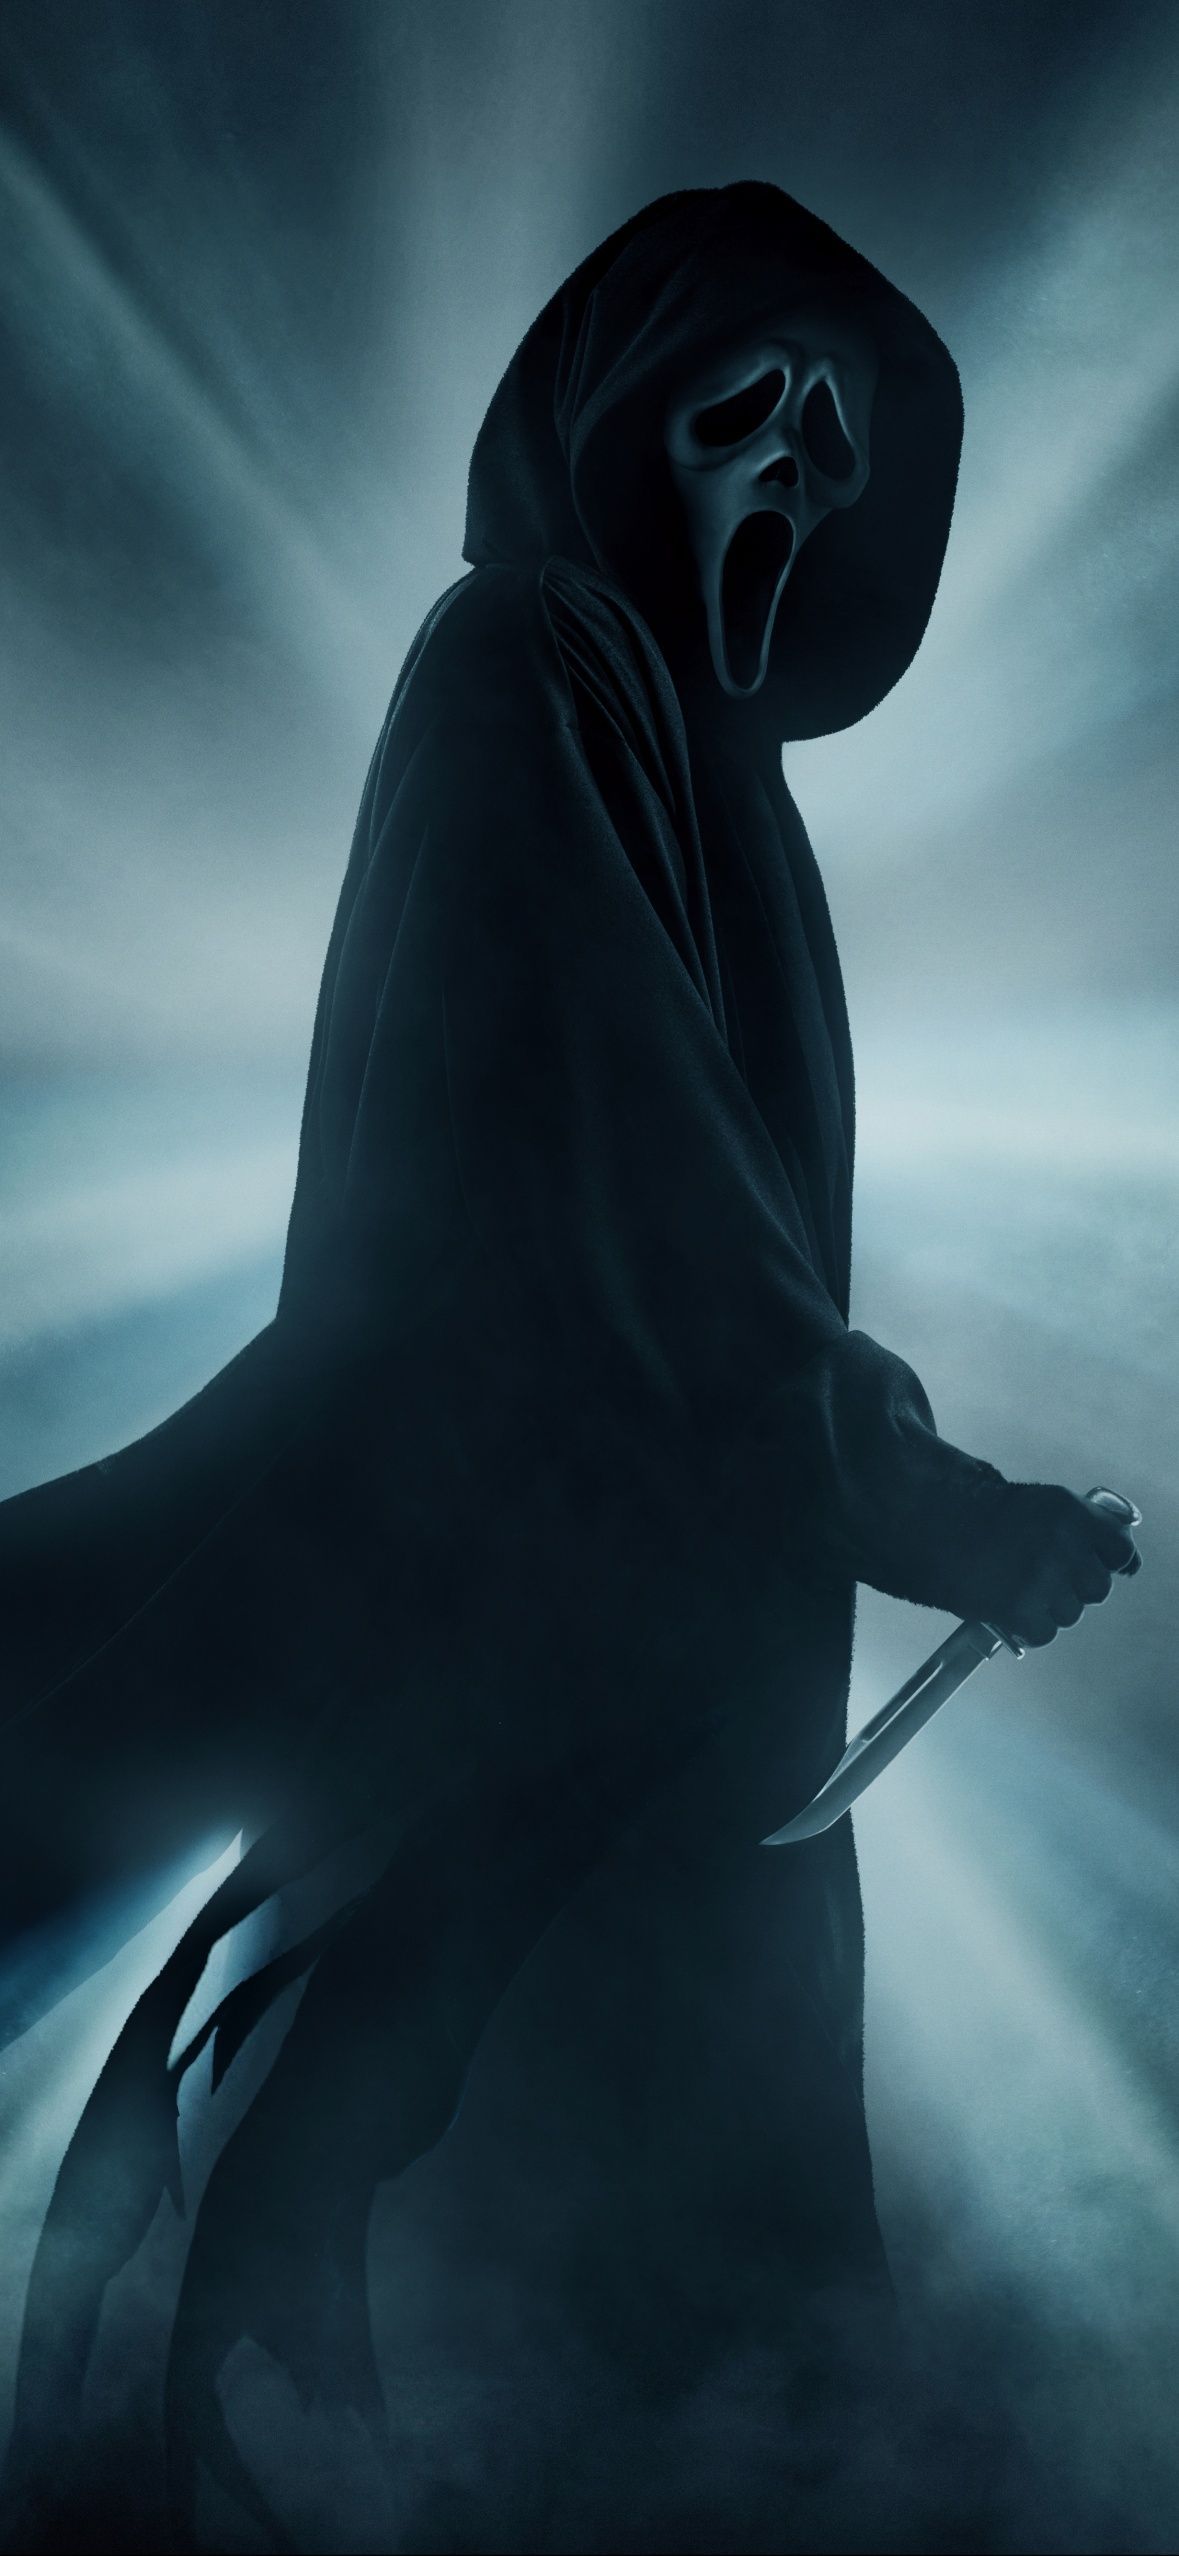 A ghostface holding a knife in the new scream movie - Ghostface